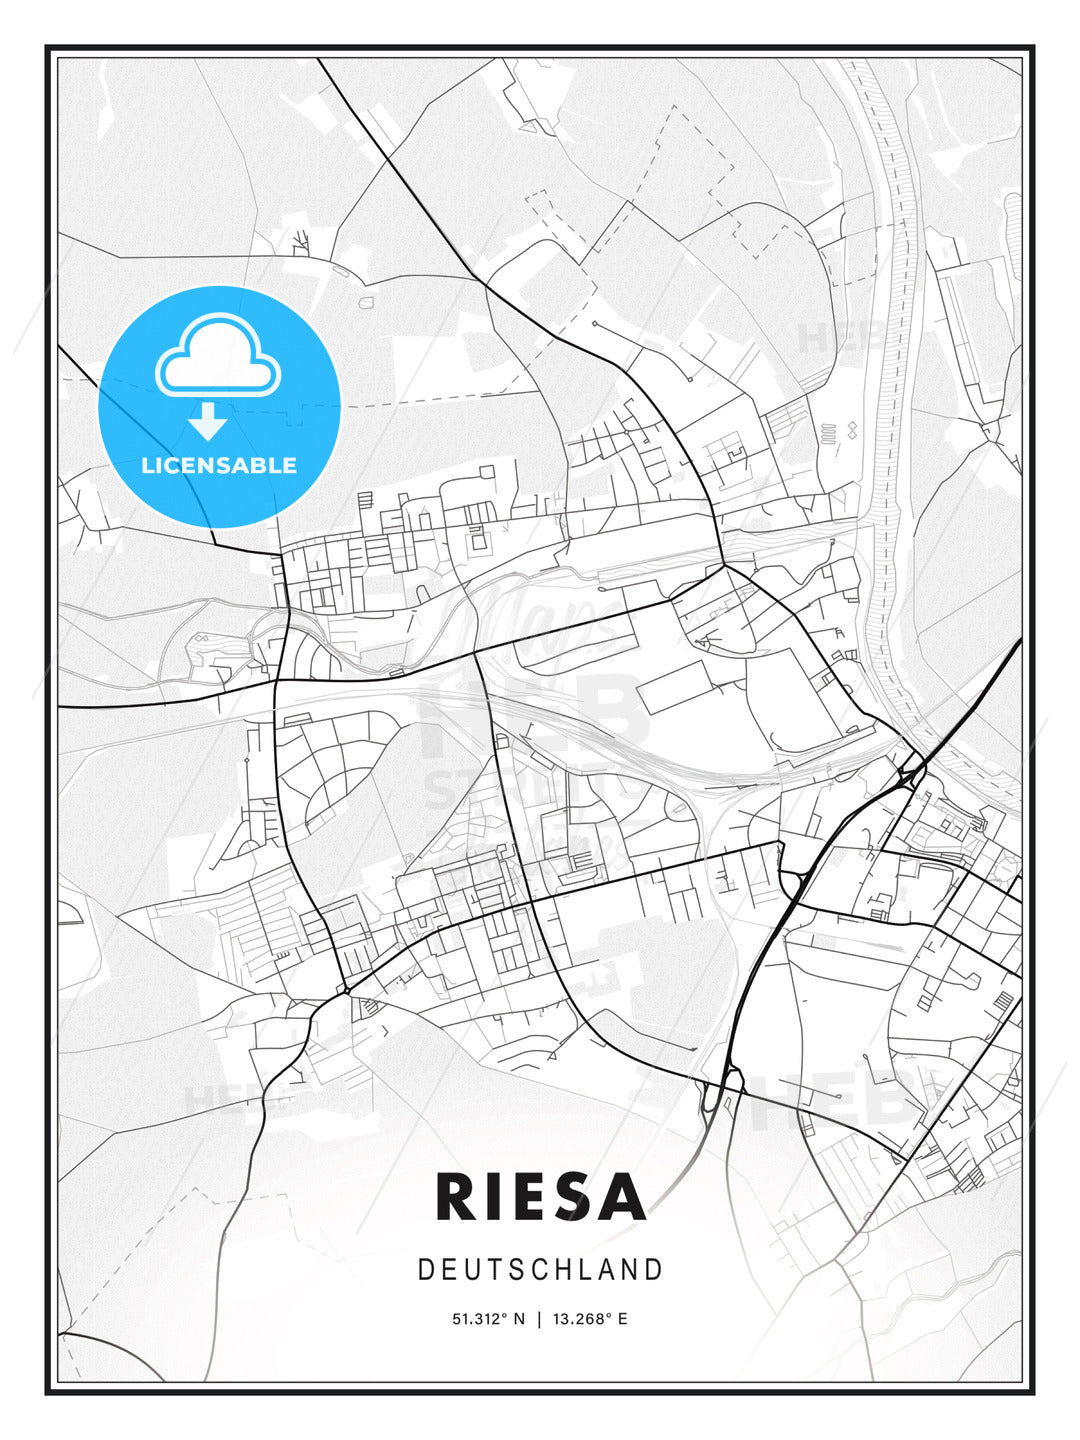 Riesa, Germany, Modern Print Template in Various Formats - HEBSTREITS Sketches